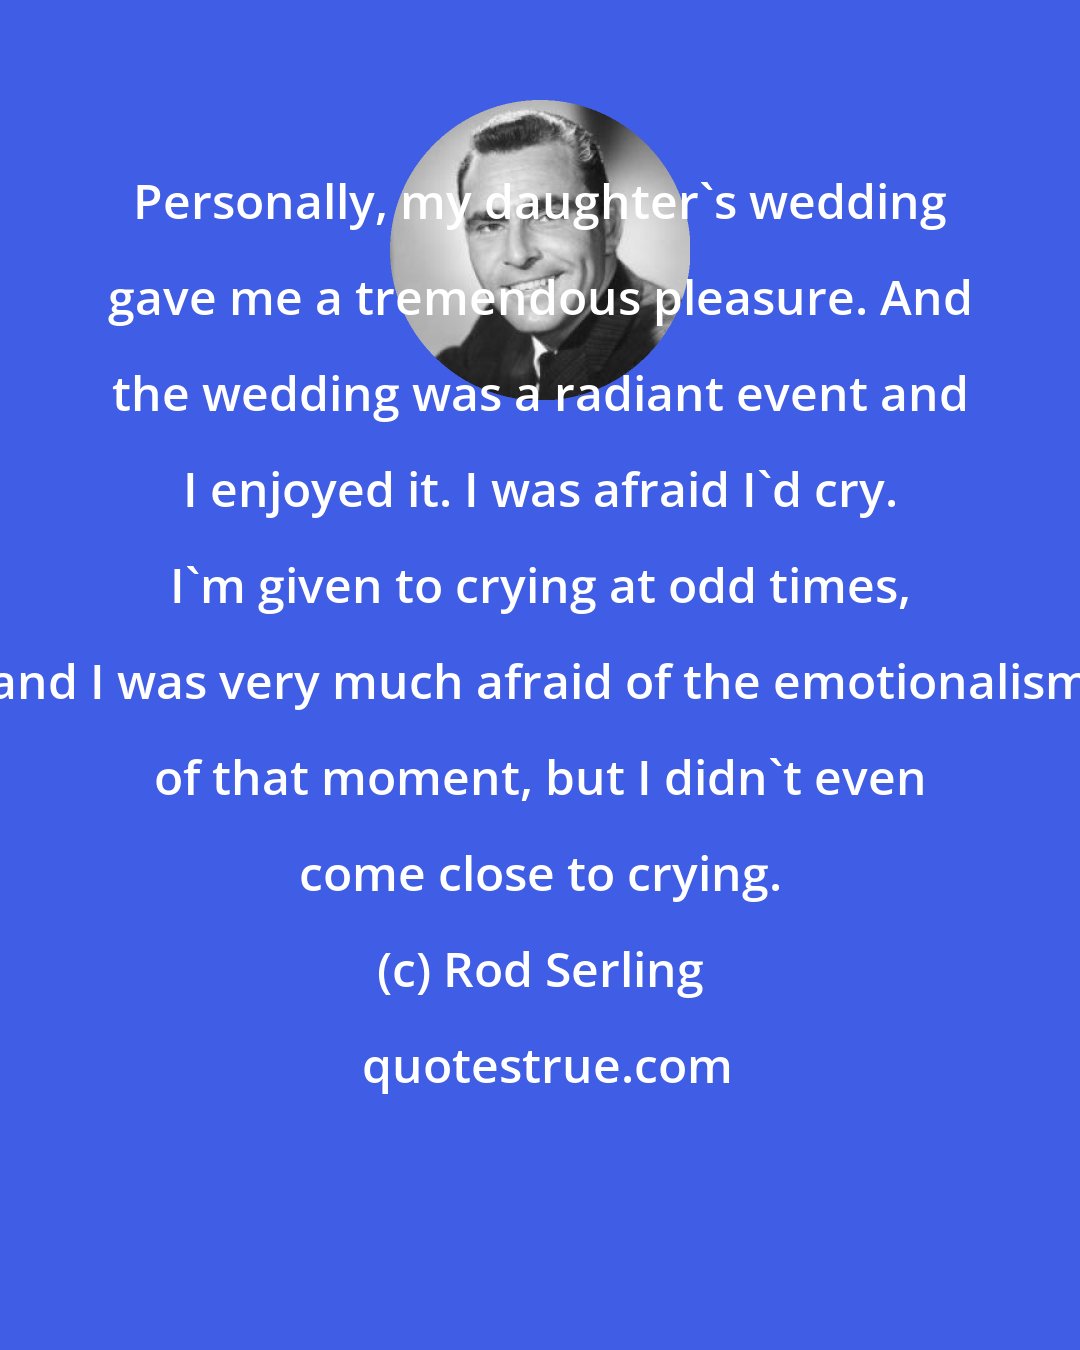 Rod Serling: Personally, my daughter's wedding gave me a tremendous pleasure. And the wedding was a radiant event and I enjoyed it. I was afraid I'd cry. I'm given to crying at odd times, and I was very much afraid of the emotionalism of that moment, but I didn't even come close to crying.